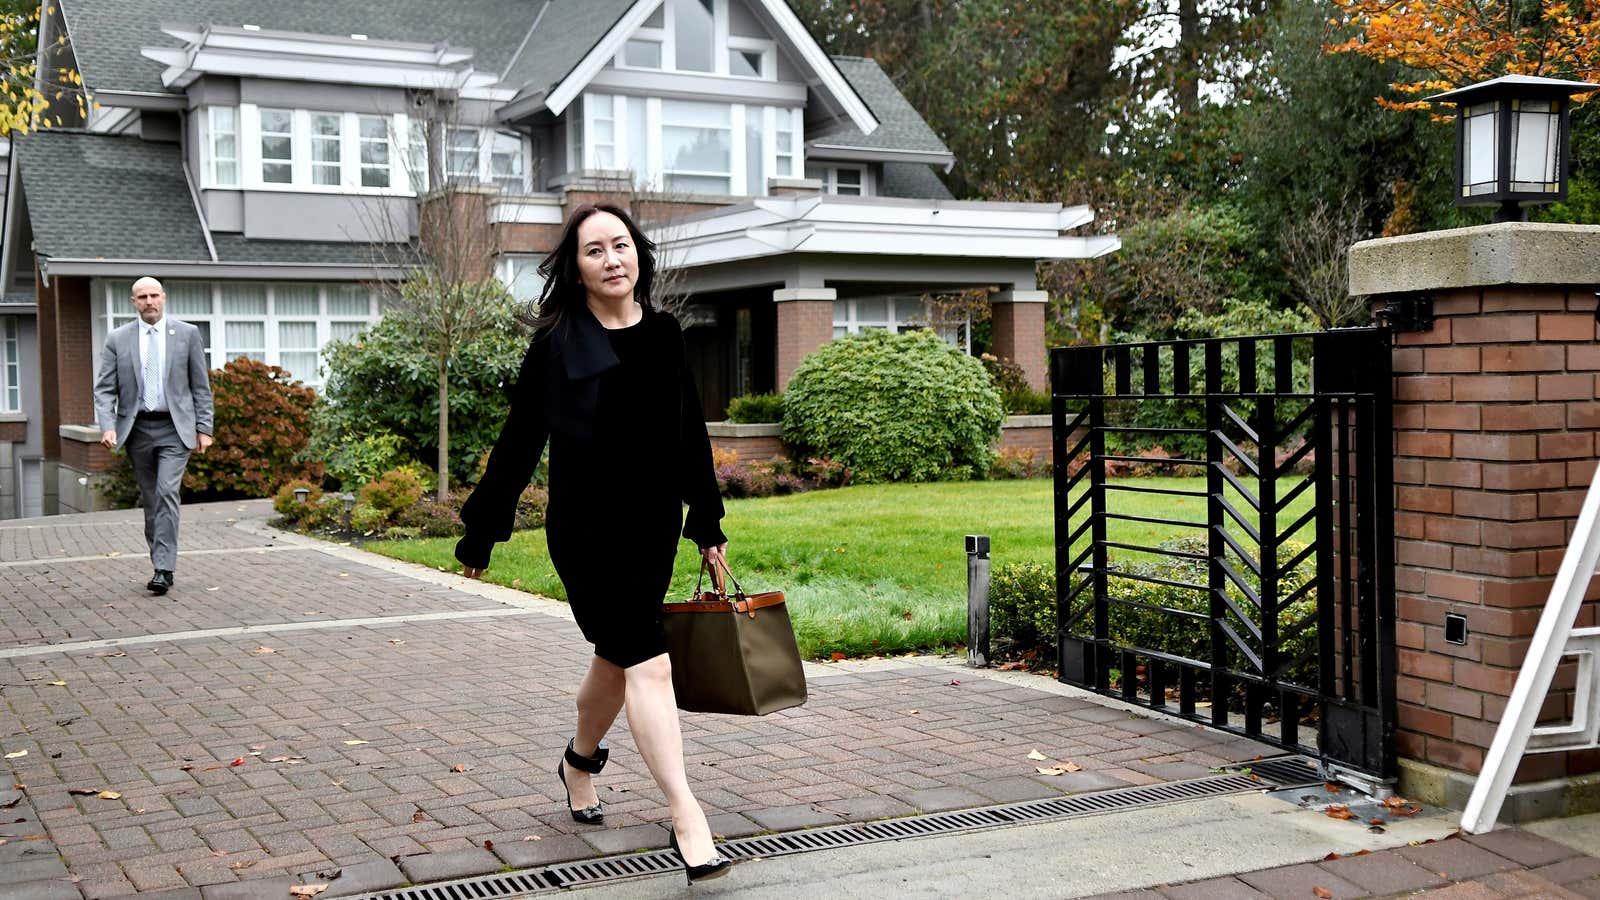 Huawei chief financial officer Meng Wanzhou is at the center of a political tug-of-war between Washington and Beijing.